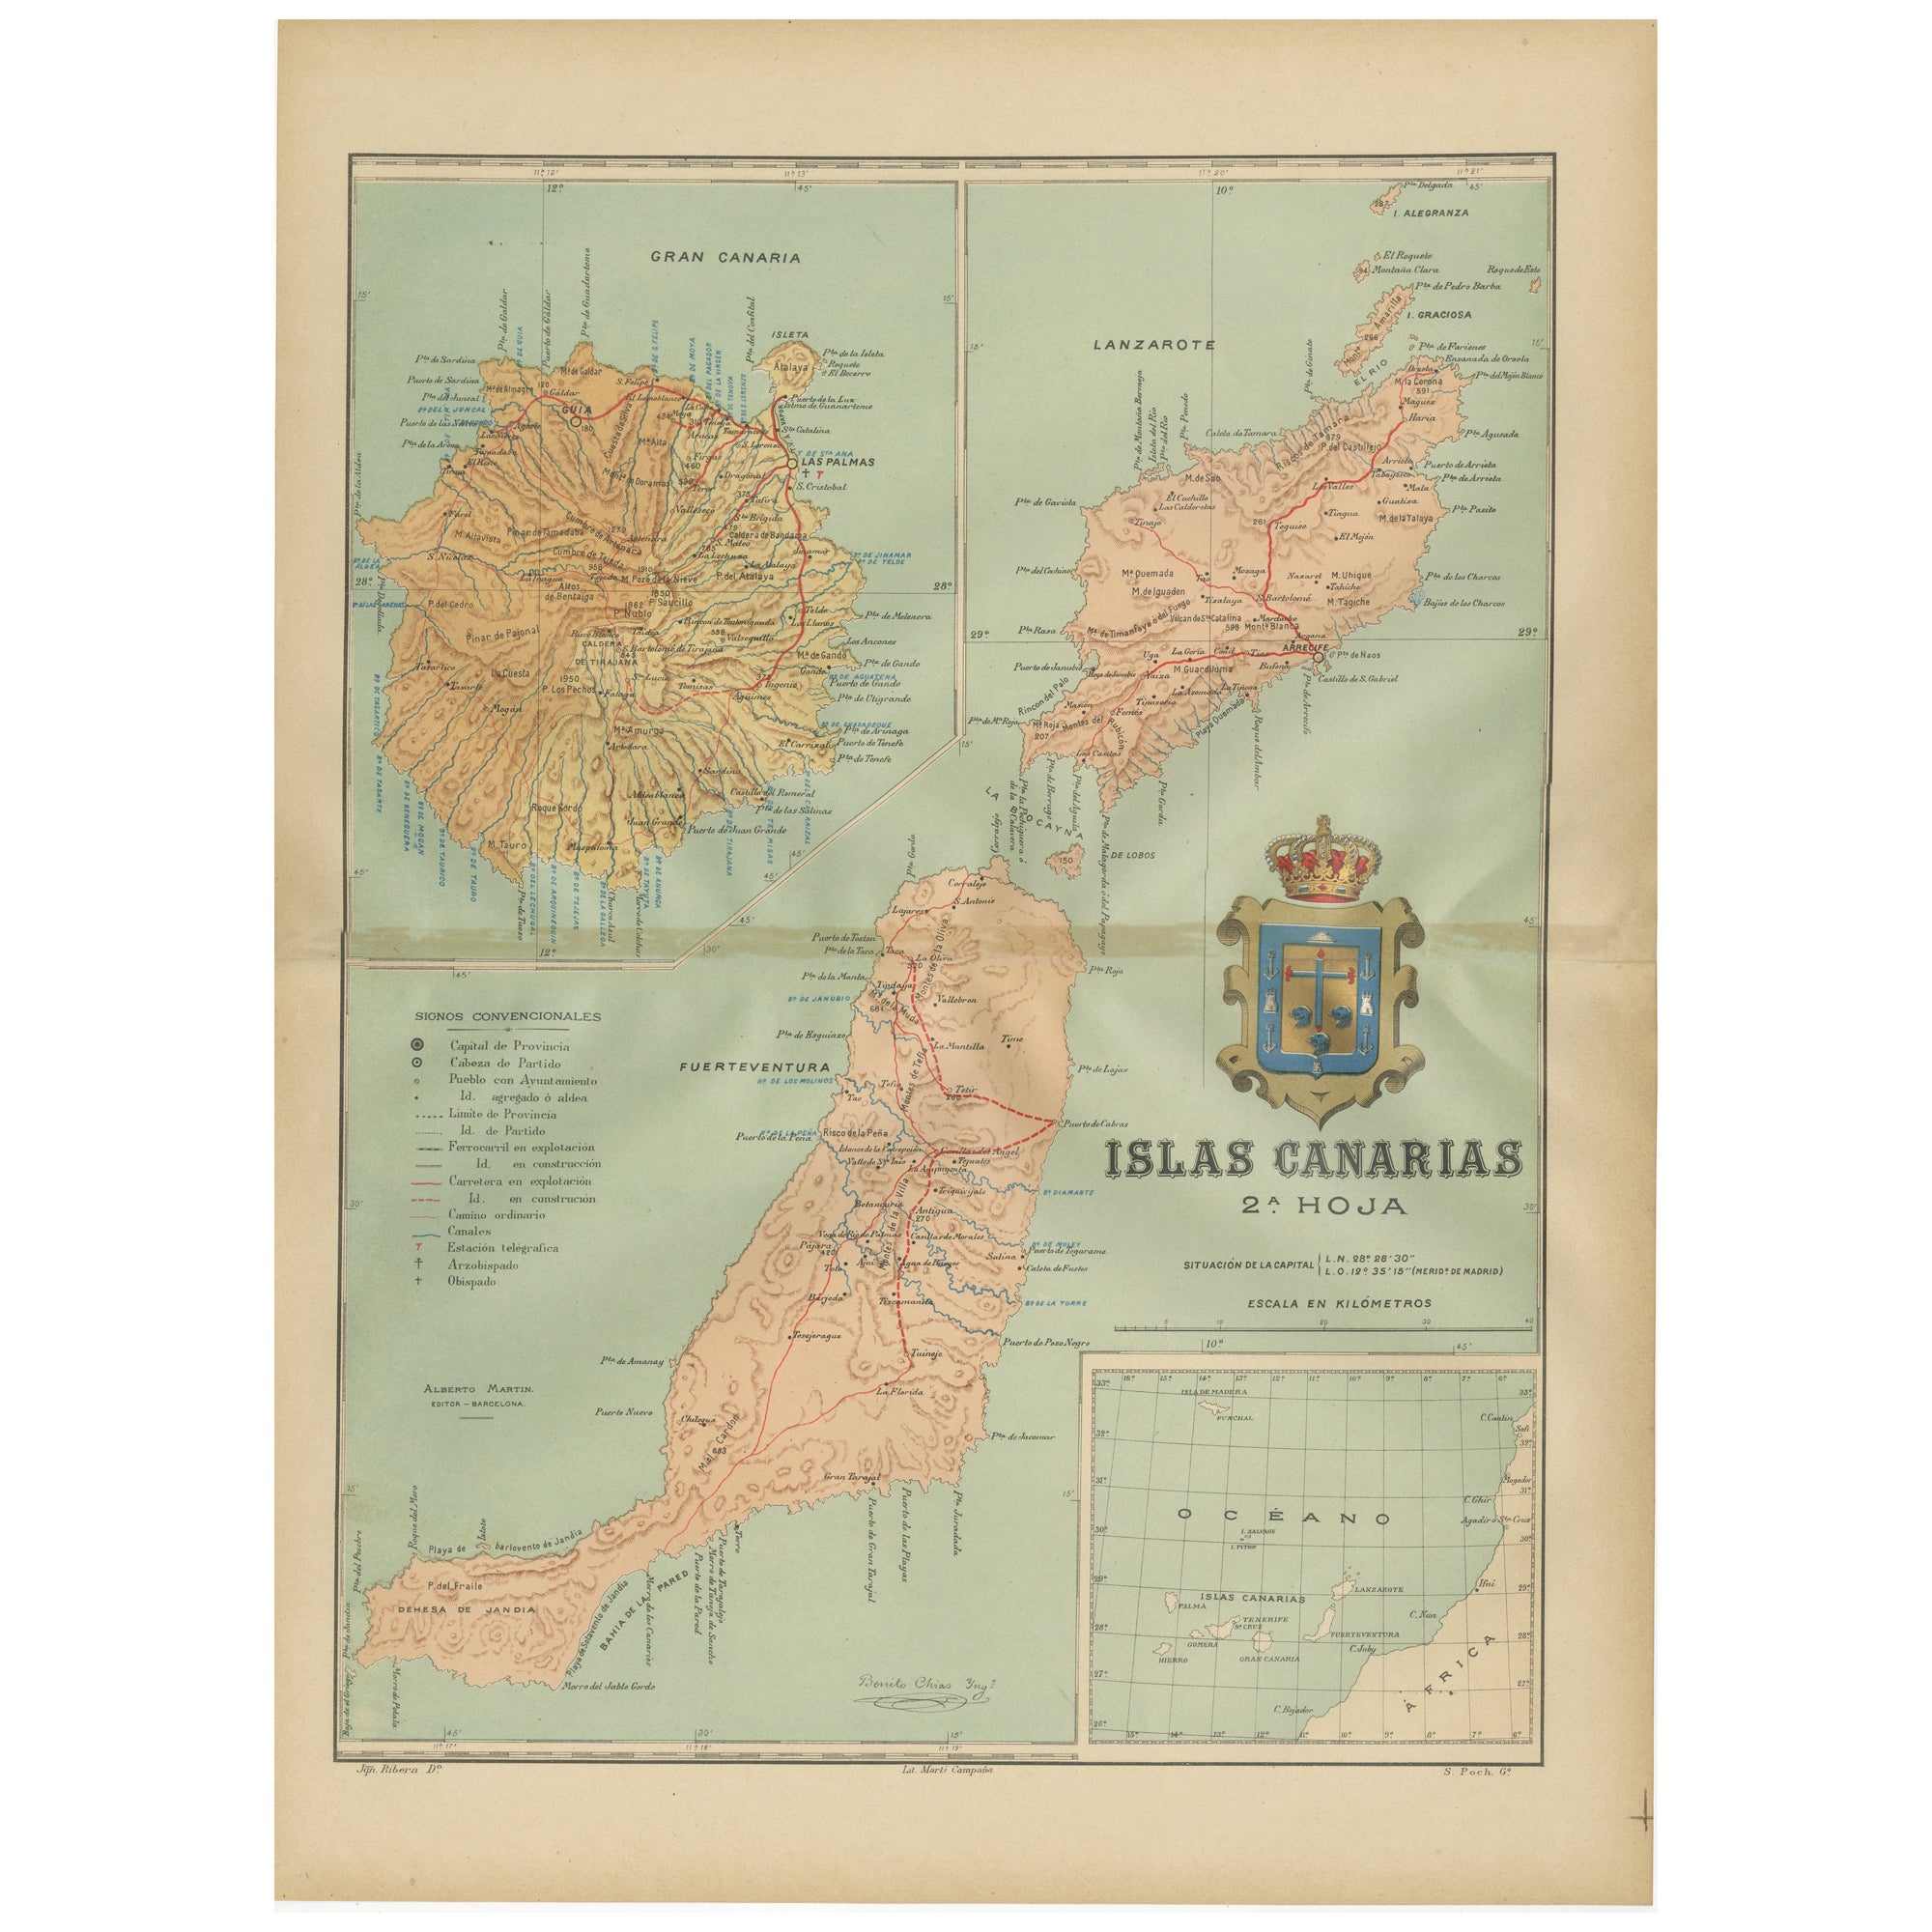 Volcanic Eden: The Canary Islands’ Tapestry of Land and Sea in 1902